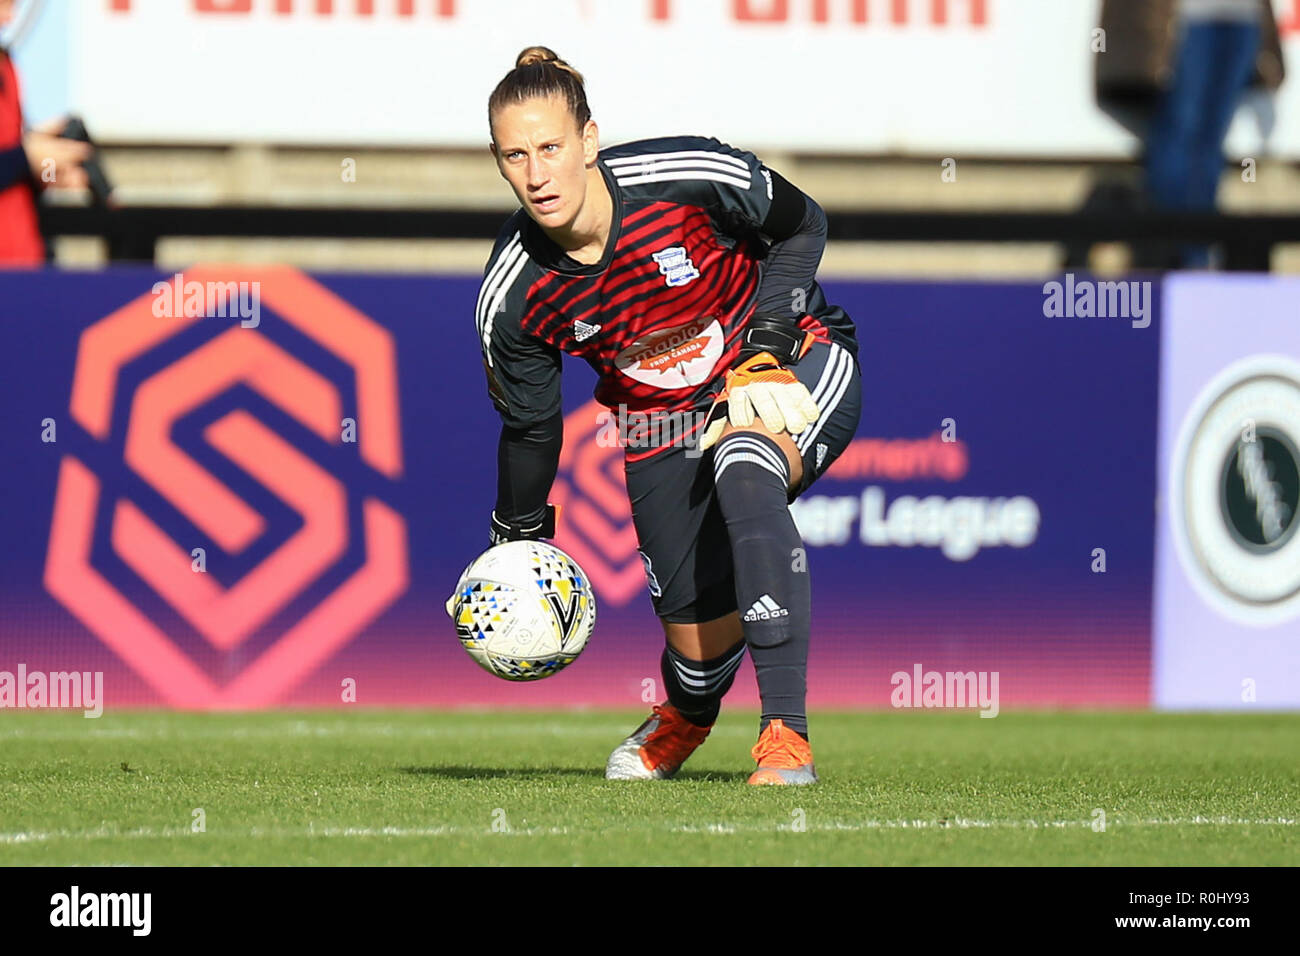 Birmingham, UK. 5th November, 2018. Birmingham City Women FC have announced that their goalkeeper ANN-KATRIN BERGER has been called up to the Germany squad for their games against Italy and Spain. Peter Lopeman/Alamy Live News Stock Photo